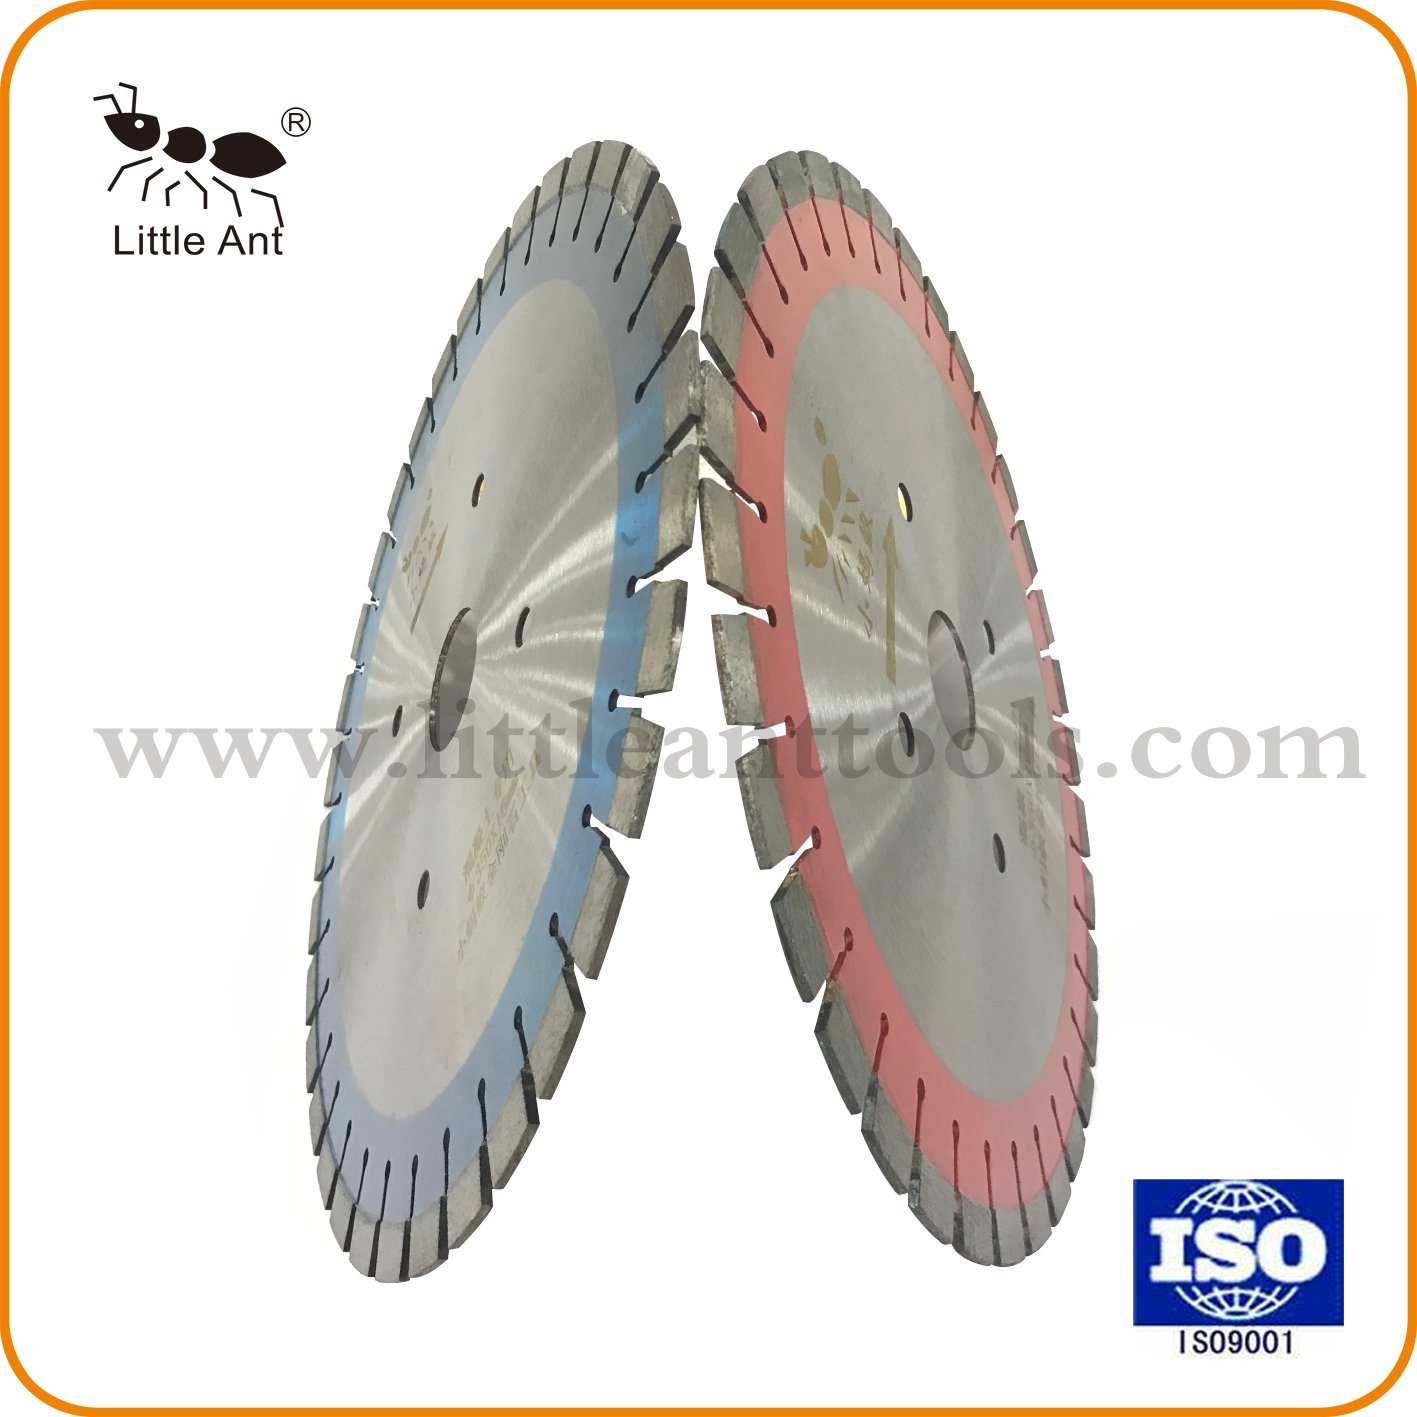 350mm Thickness 3.2mm Concrete Cutting Disc Diamond Saw Blade